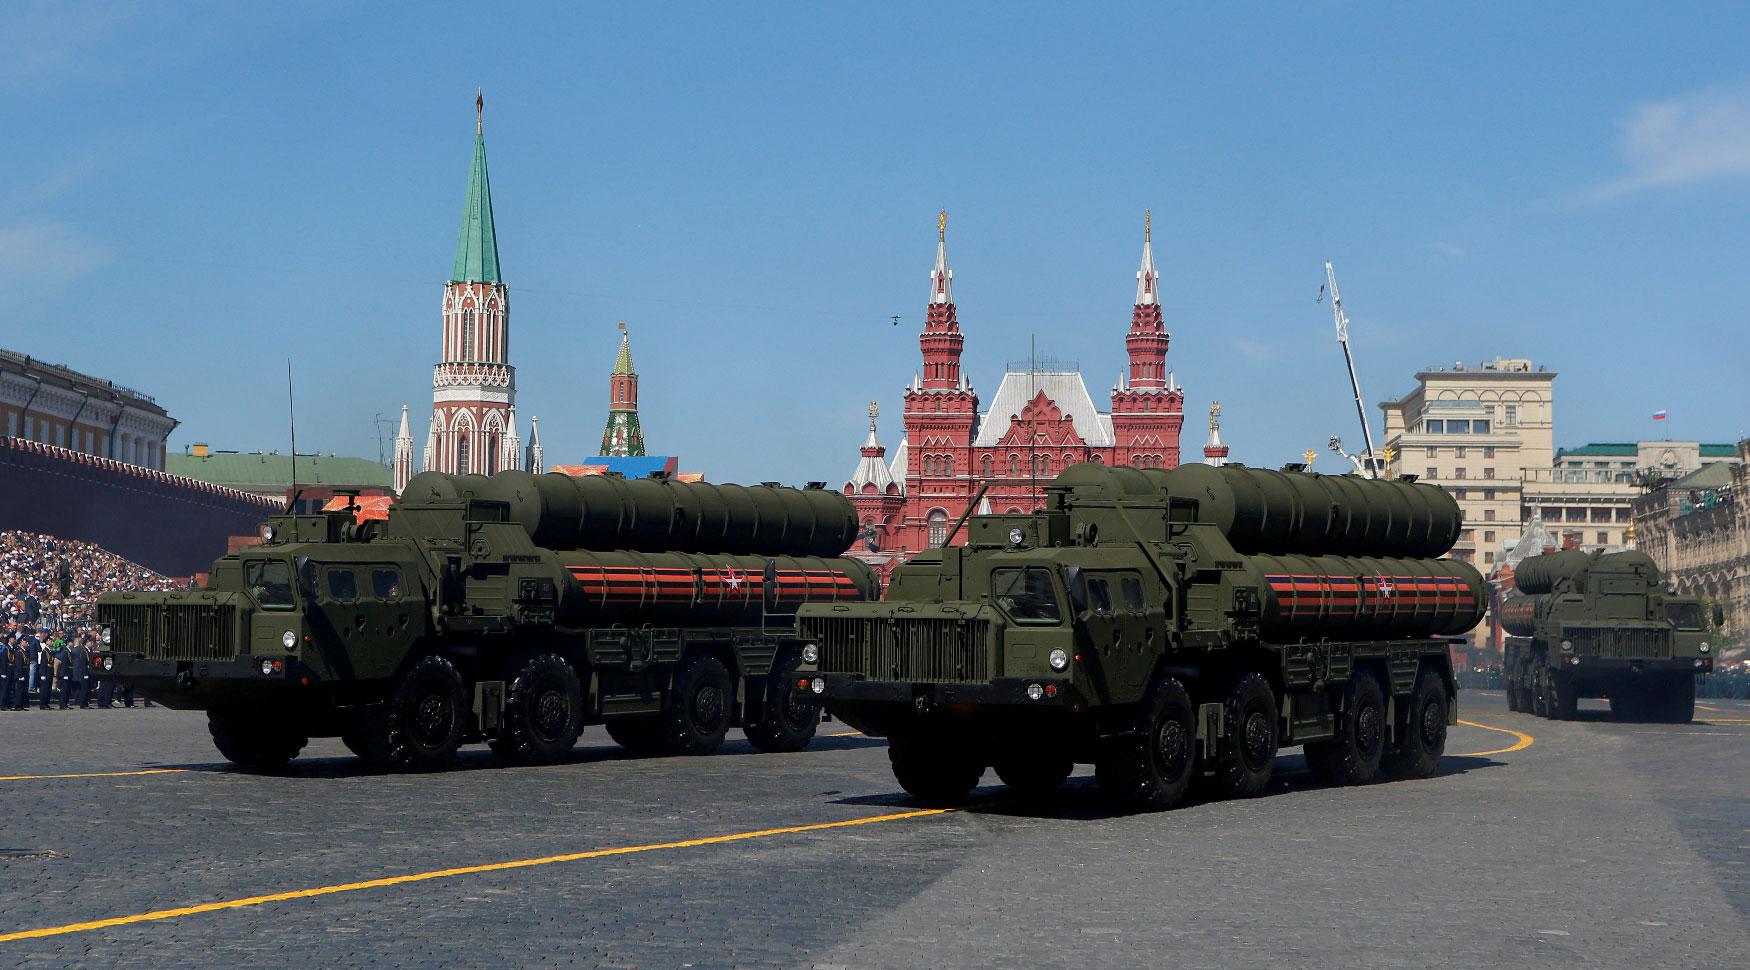 S-400 surface-to-air missile system pictured in Moscow